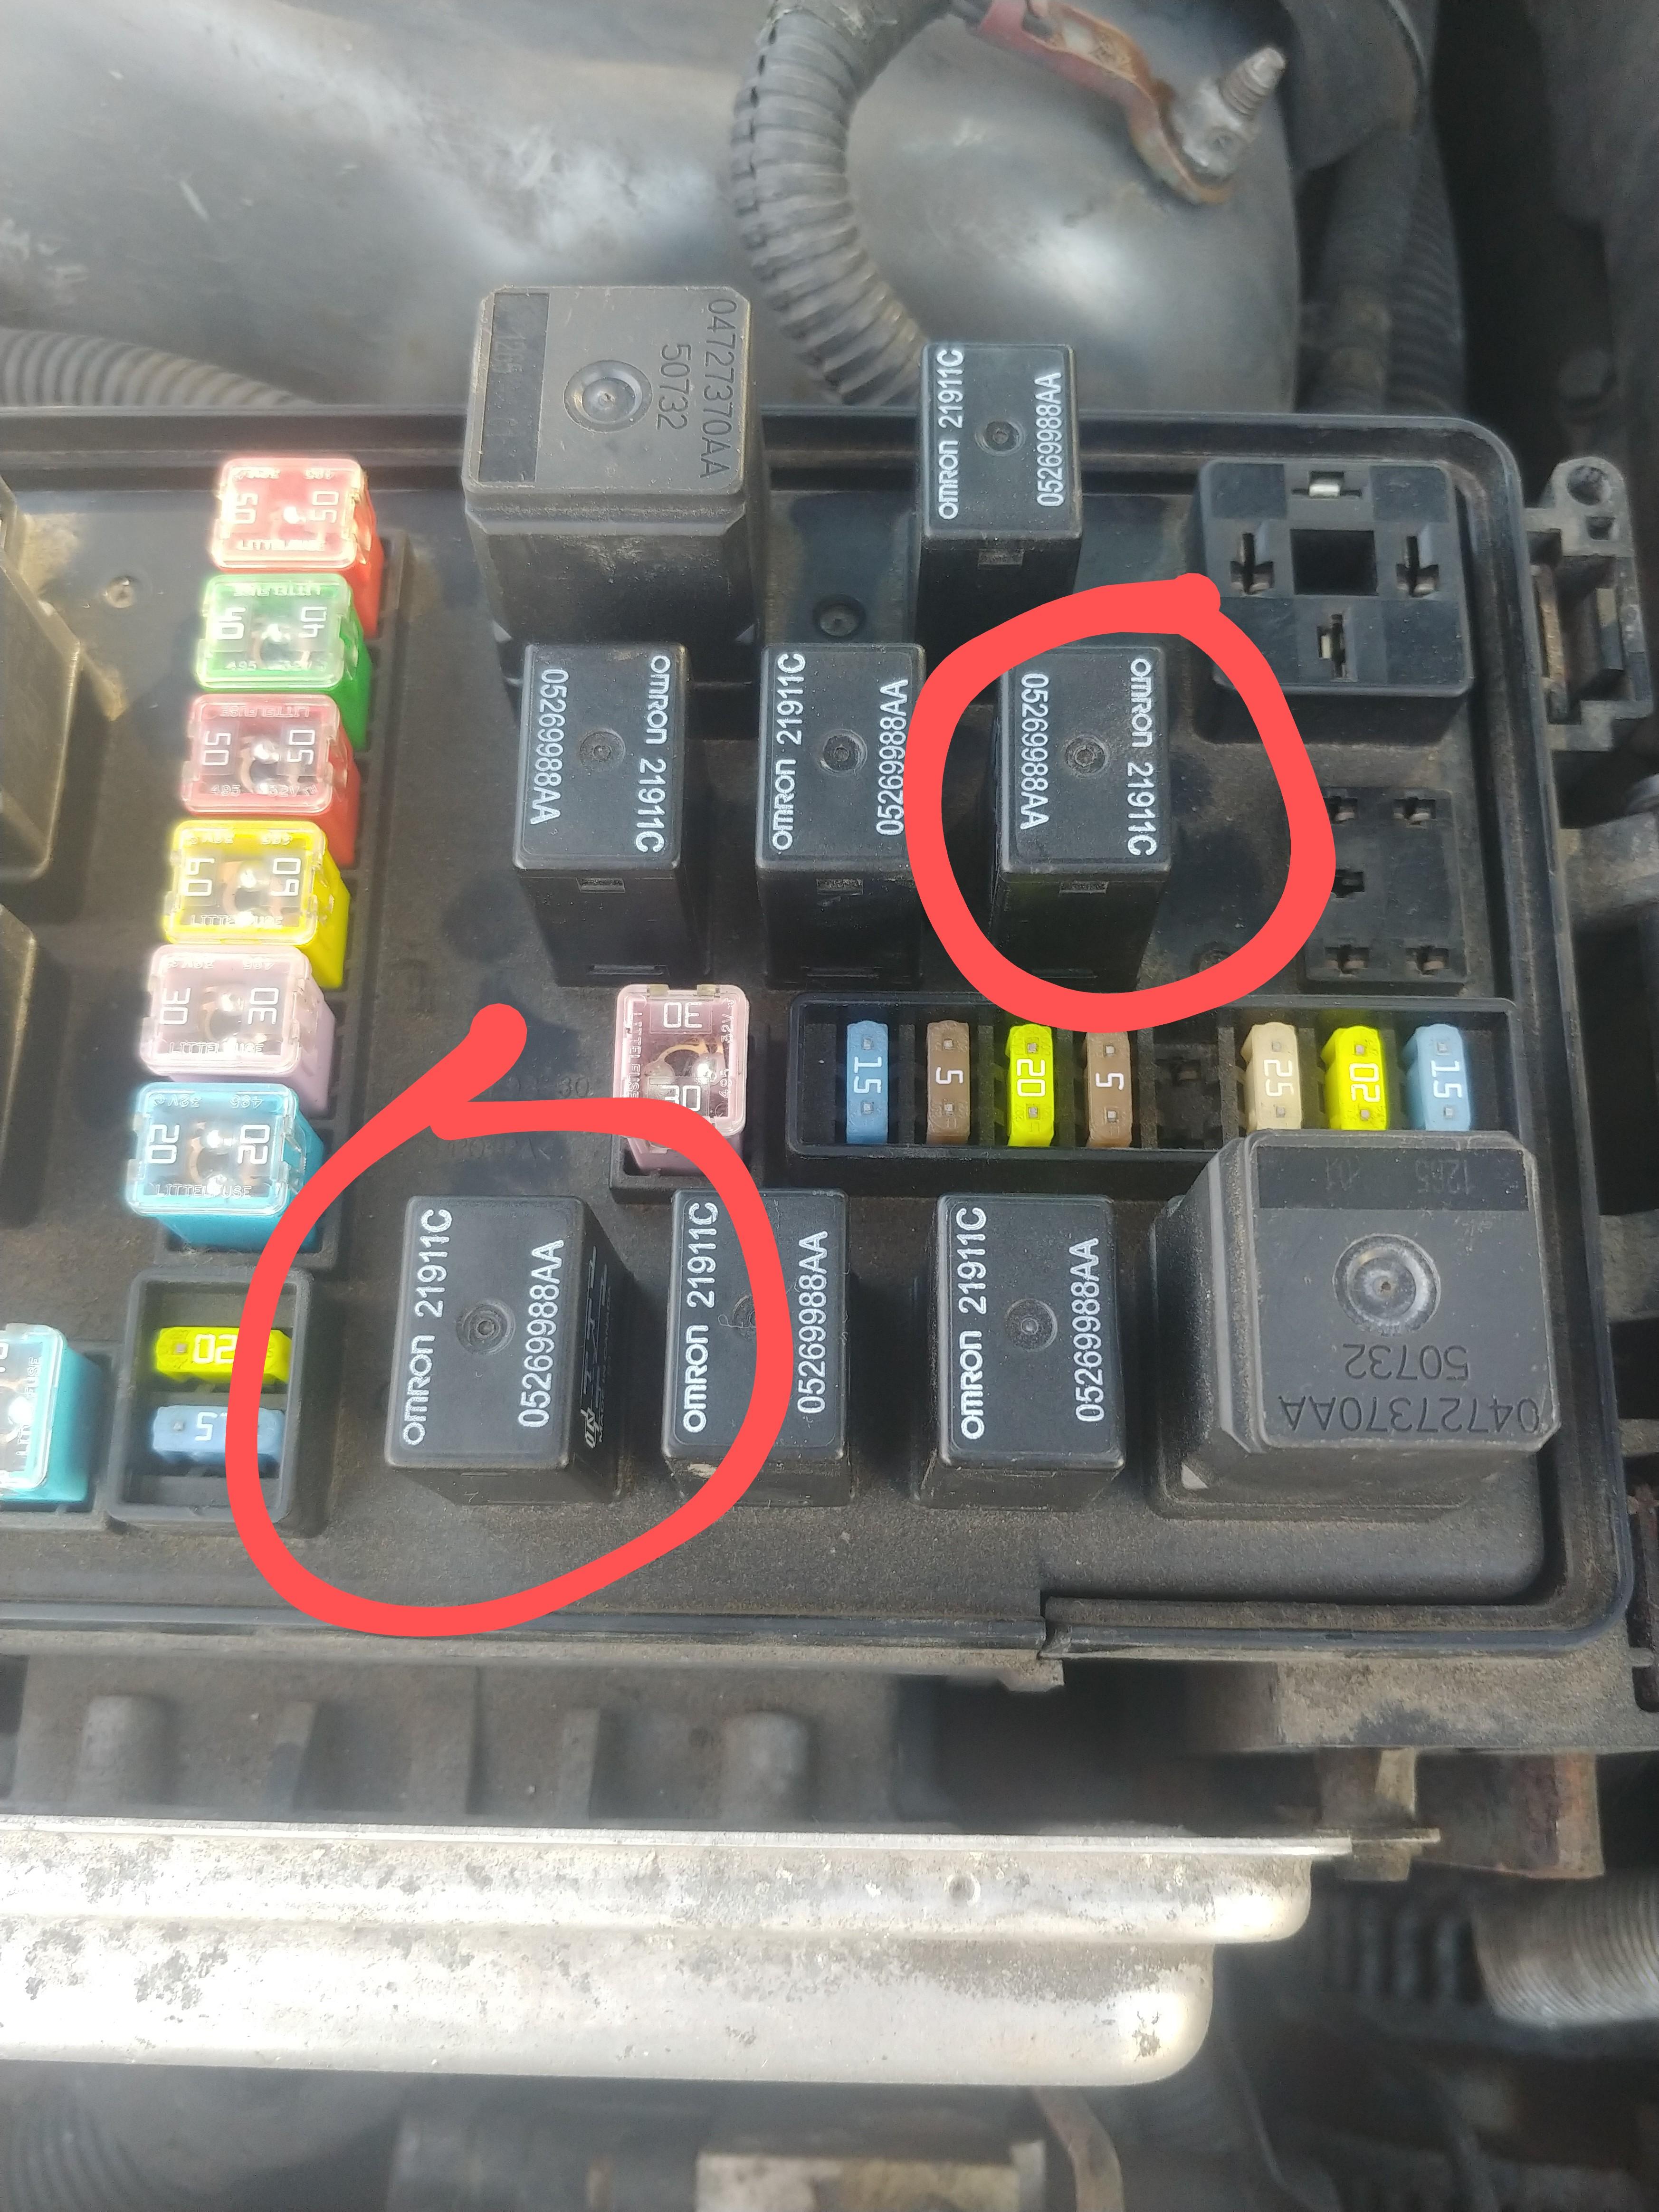 Two relays I was told to switch around to keep the Chrysler going